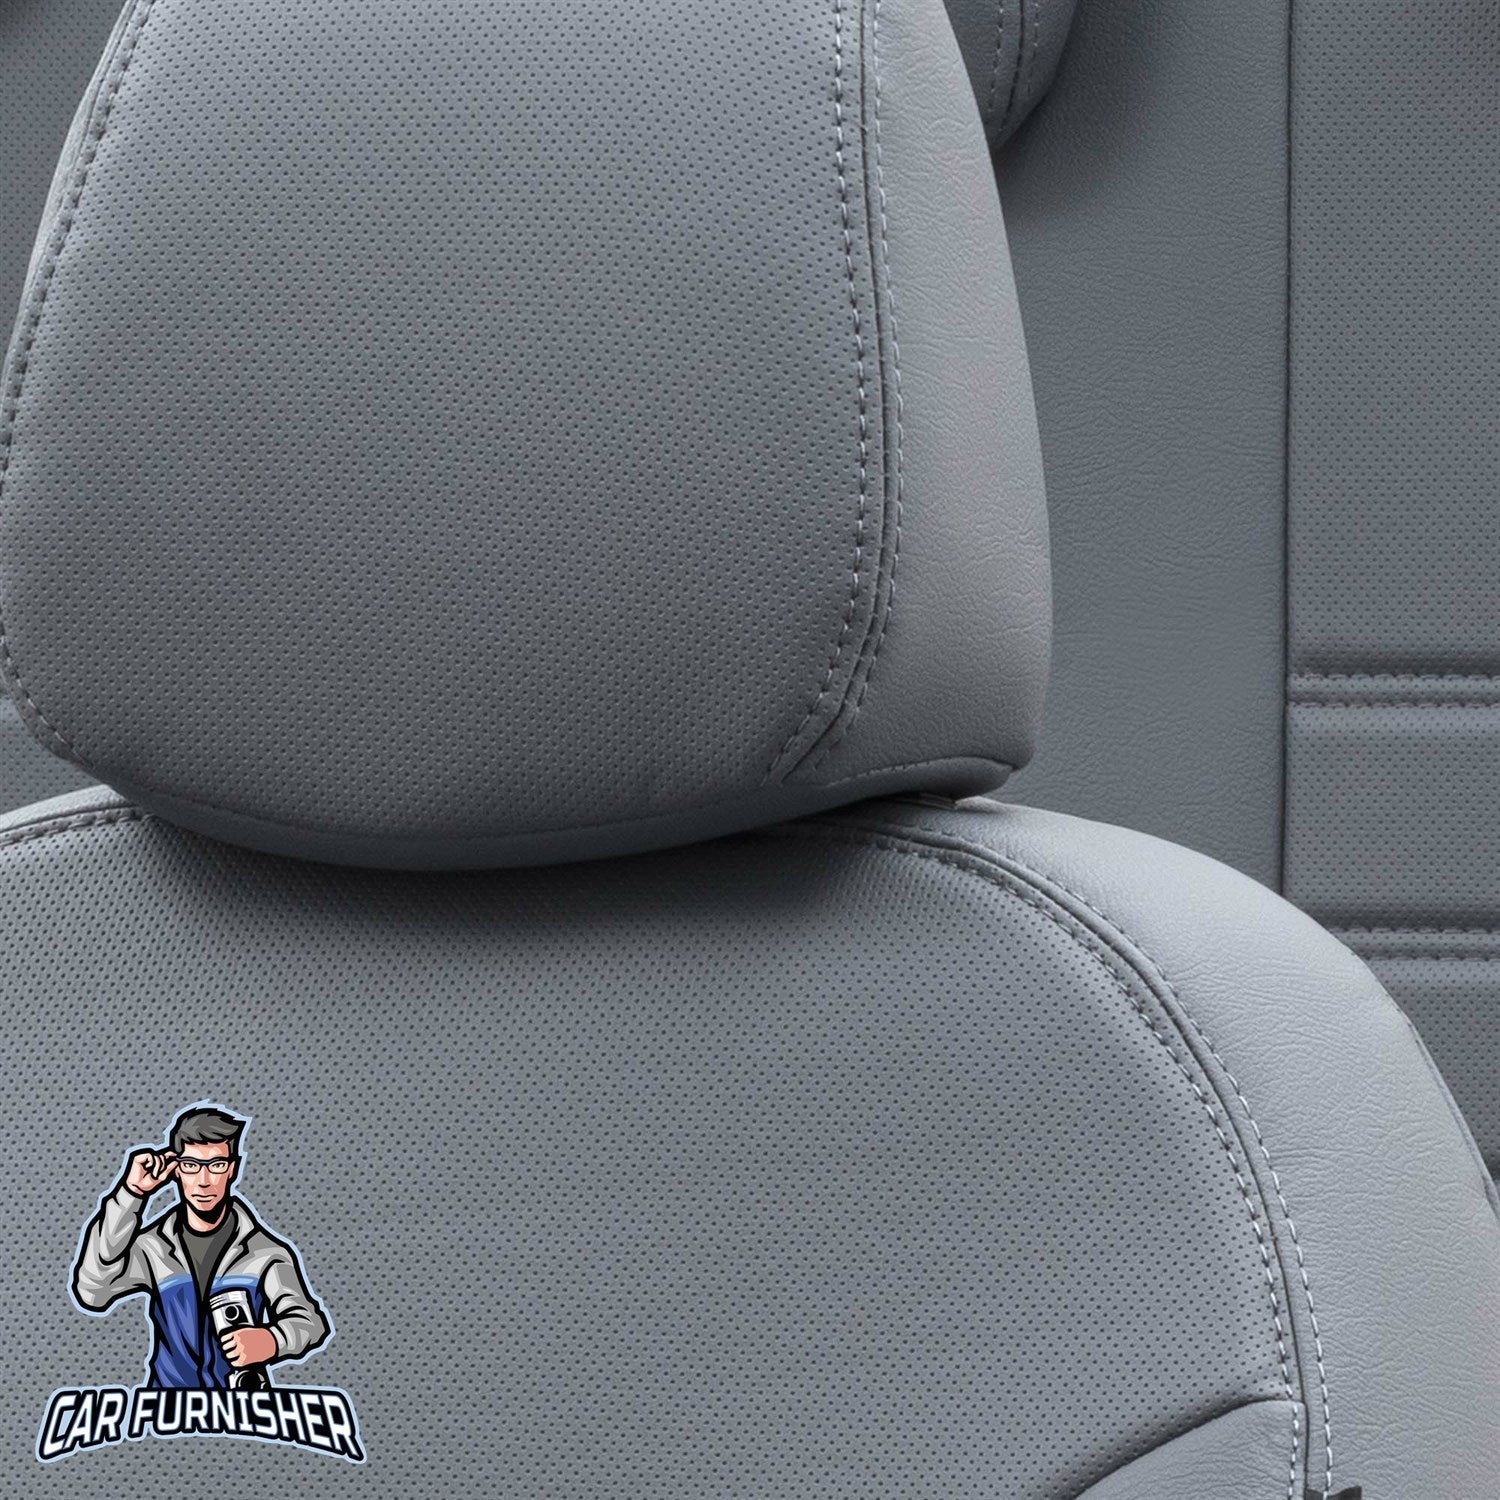 Renault Scenic Seat Covers Istanbul Leather Design Smoked Leather